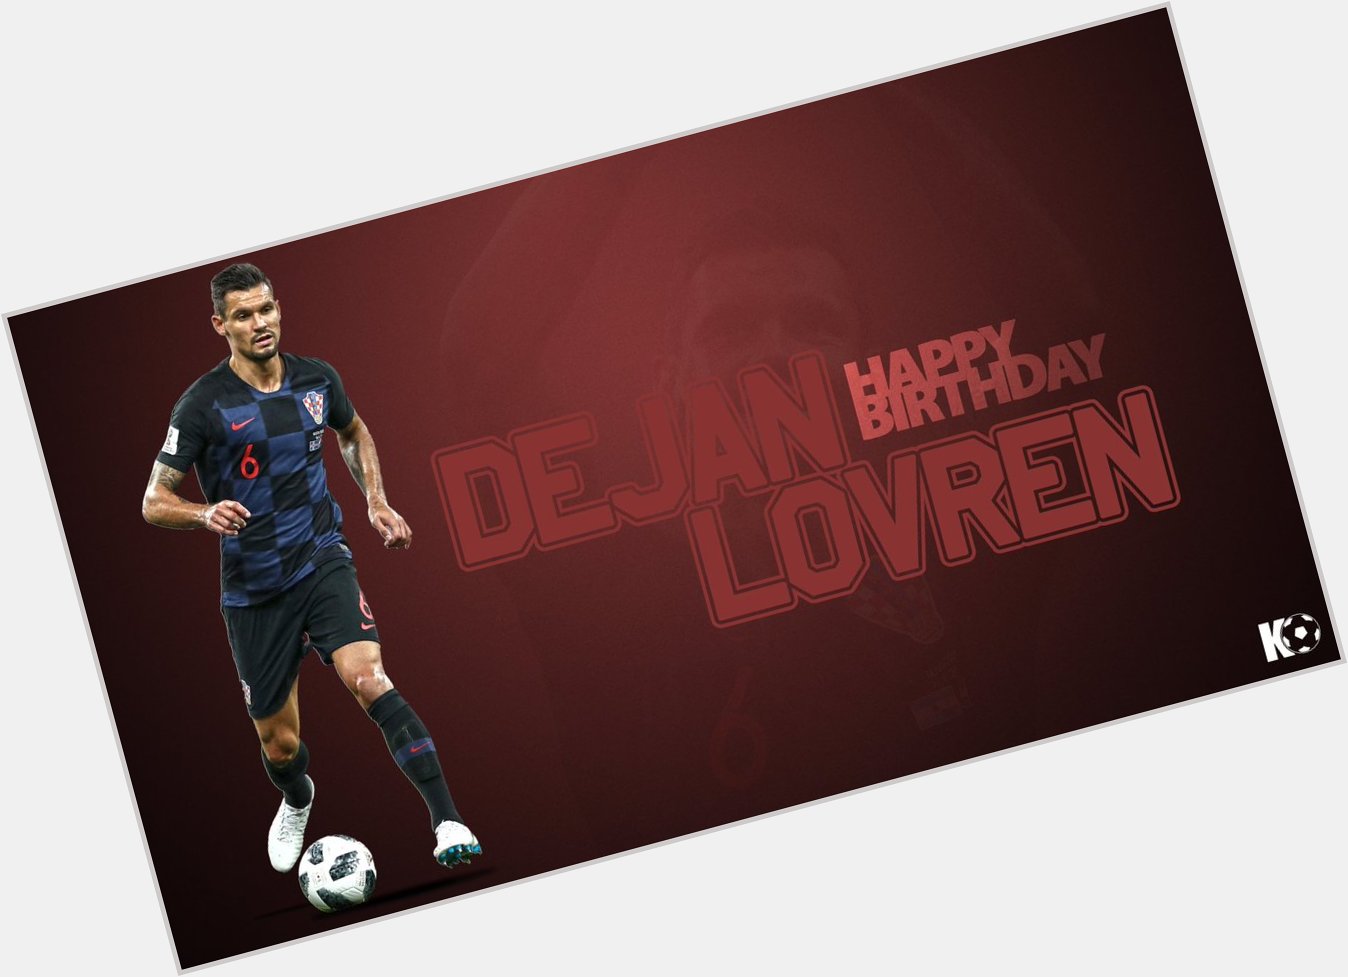 Dejan Lovren is turning 29 today! Join in wishing the Liverpool and Croatia defender a Happy Birthday! 